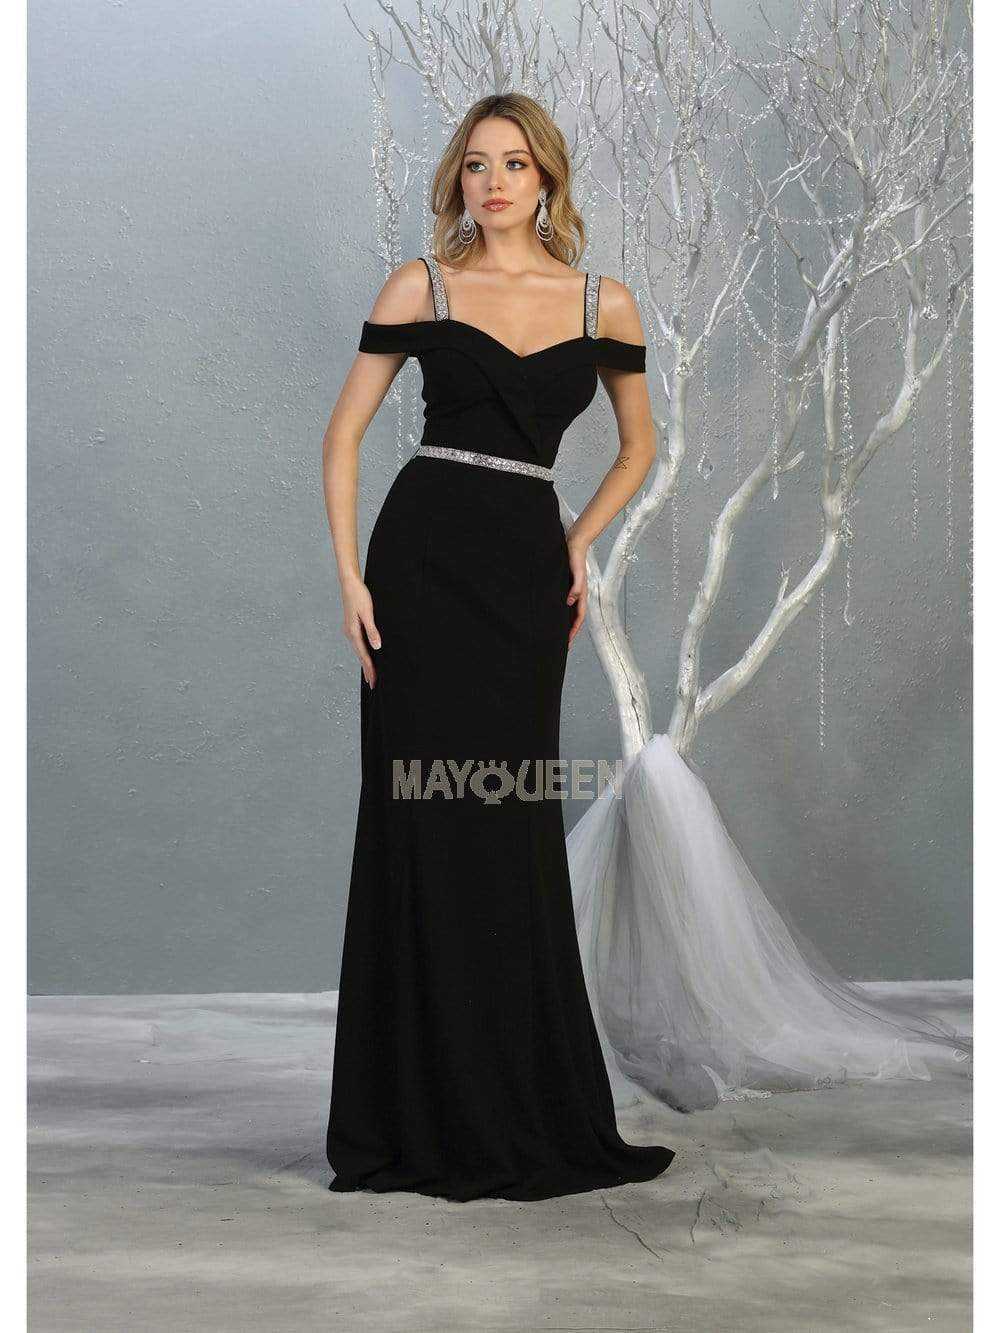 May Queen, May Queen - MQ1765 Embellished Off-Shoulder Sheath Dress